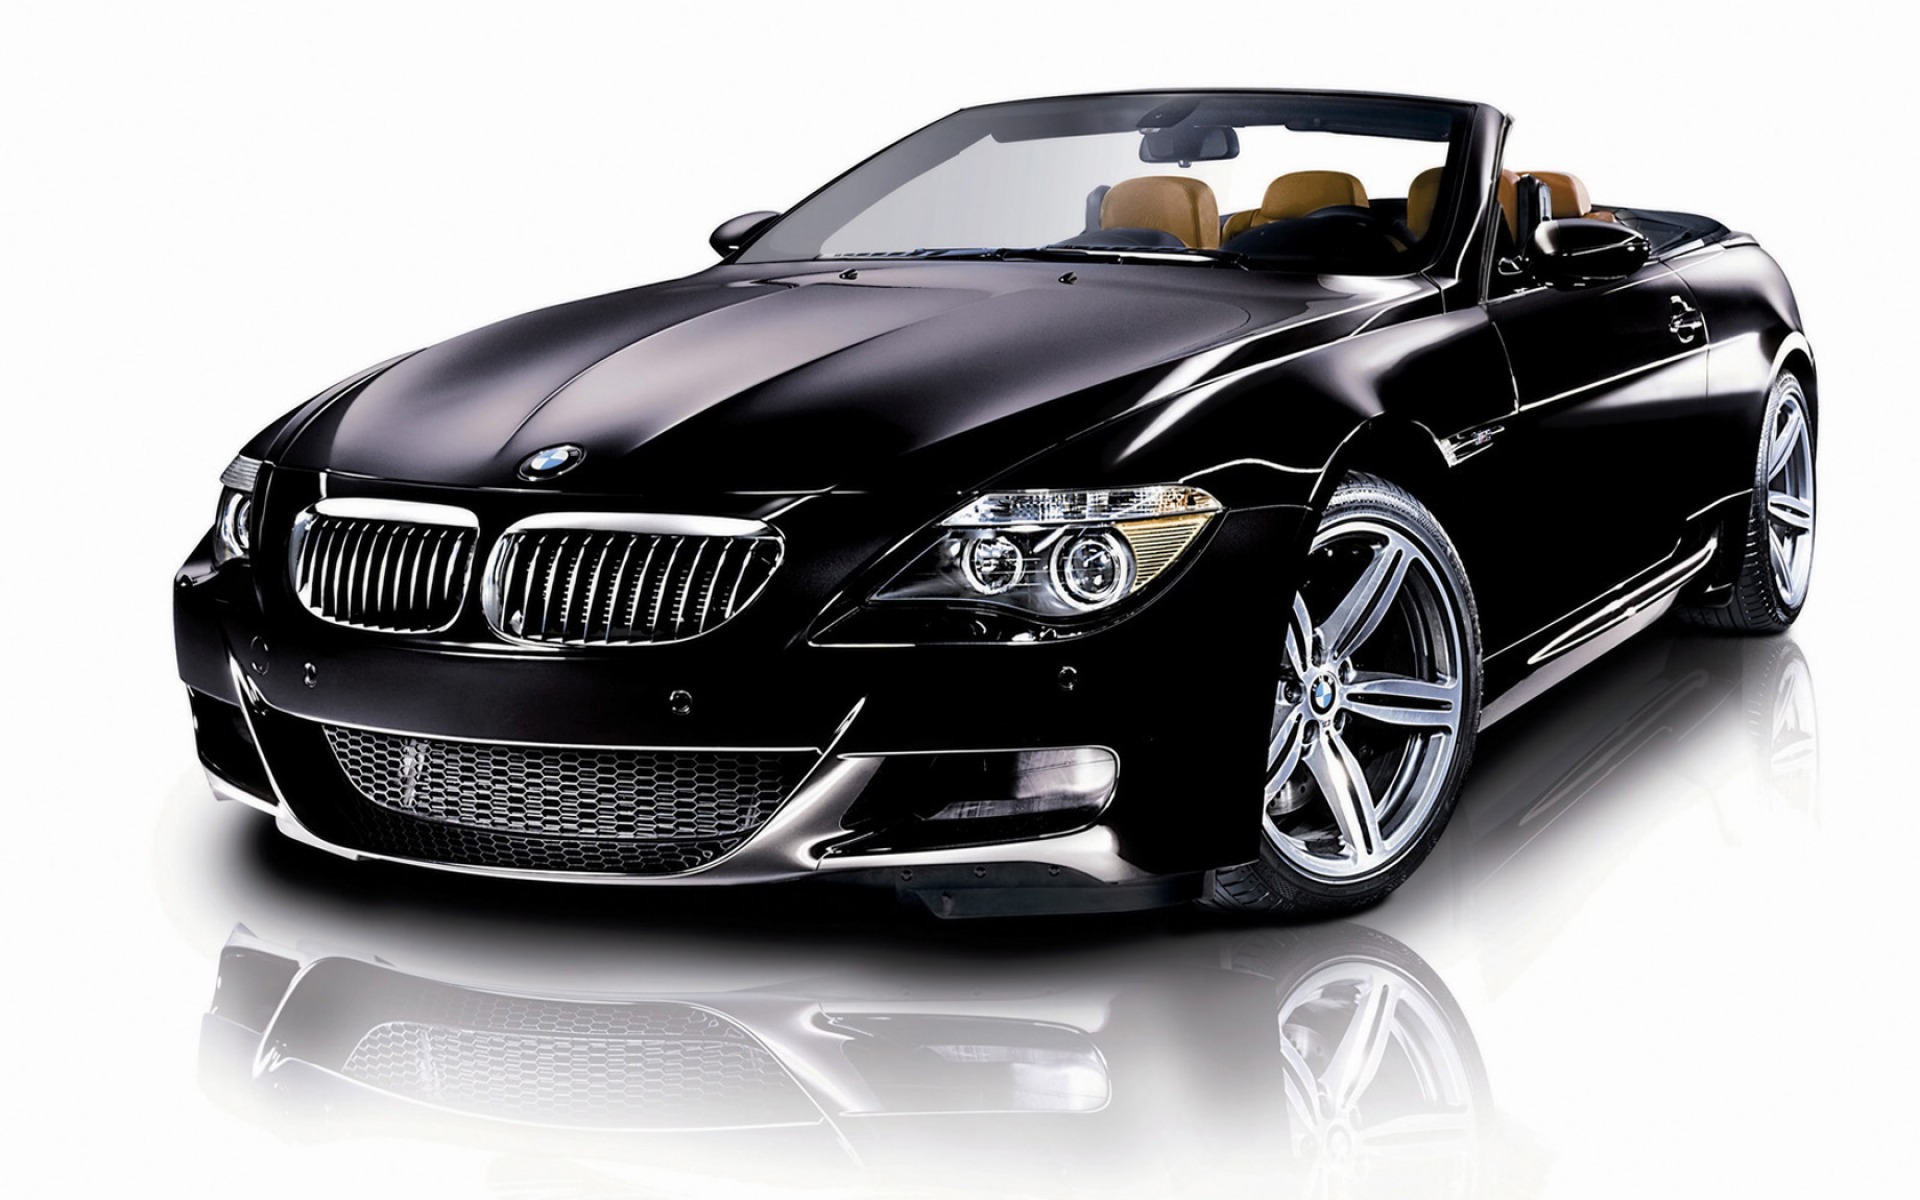 Luxury Bmw Cars Wallpaper With Image Car Of